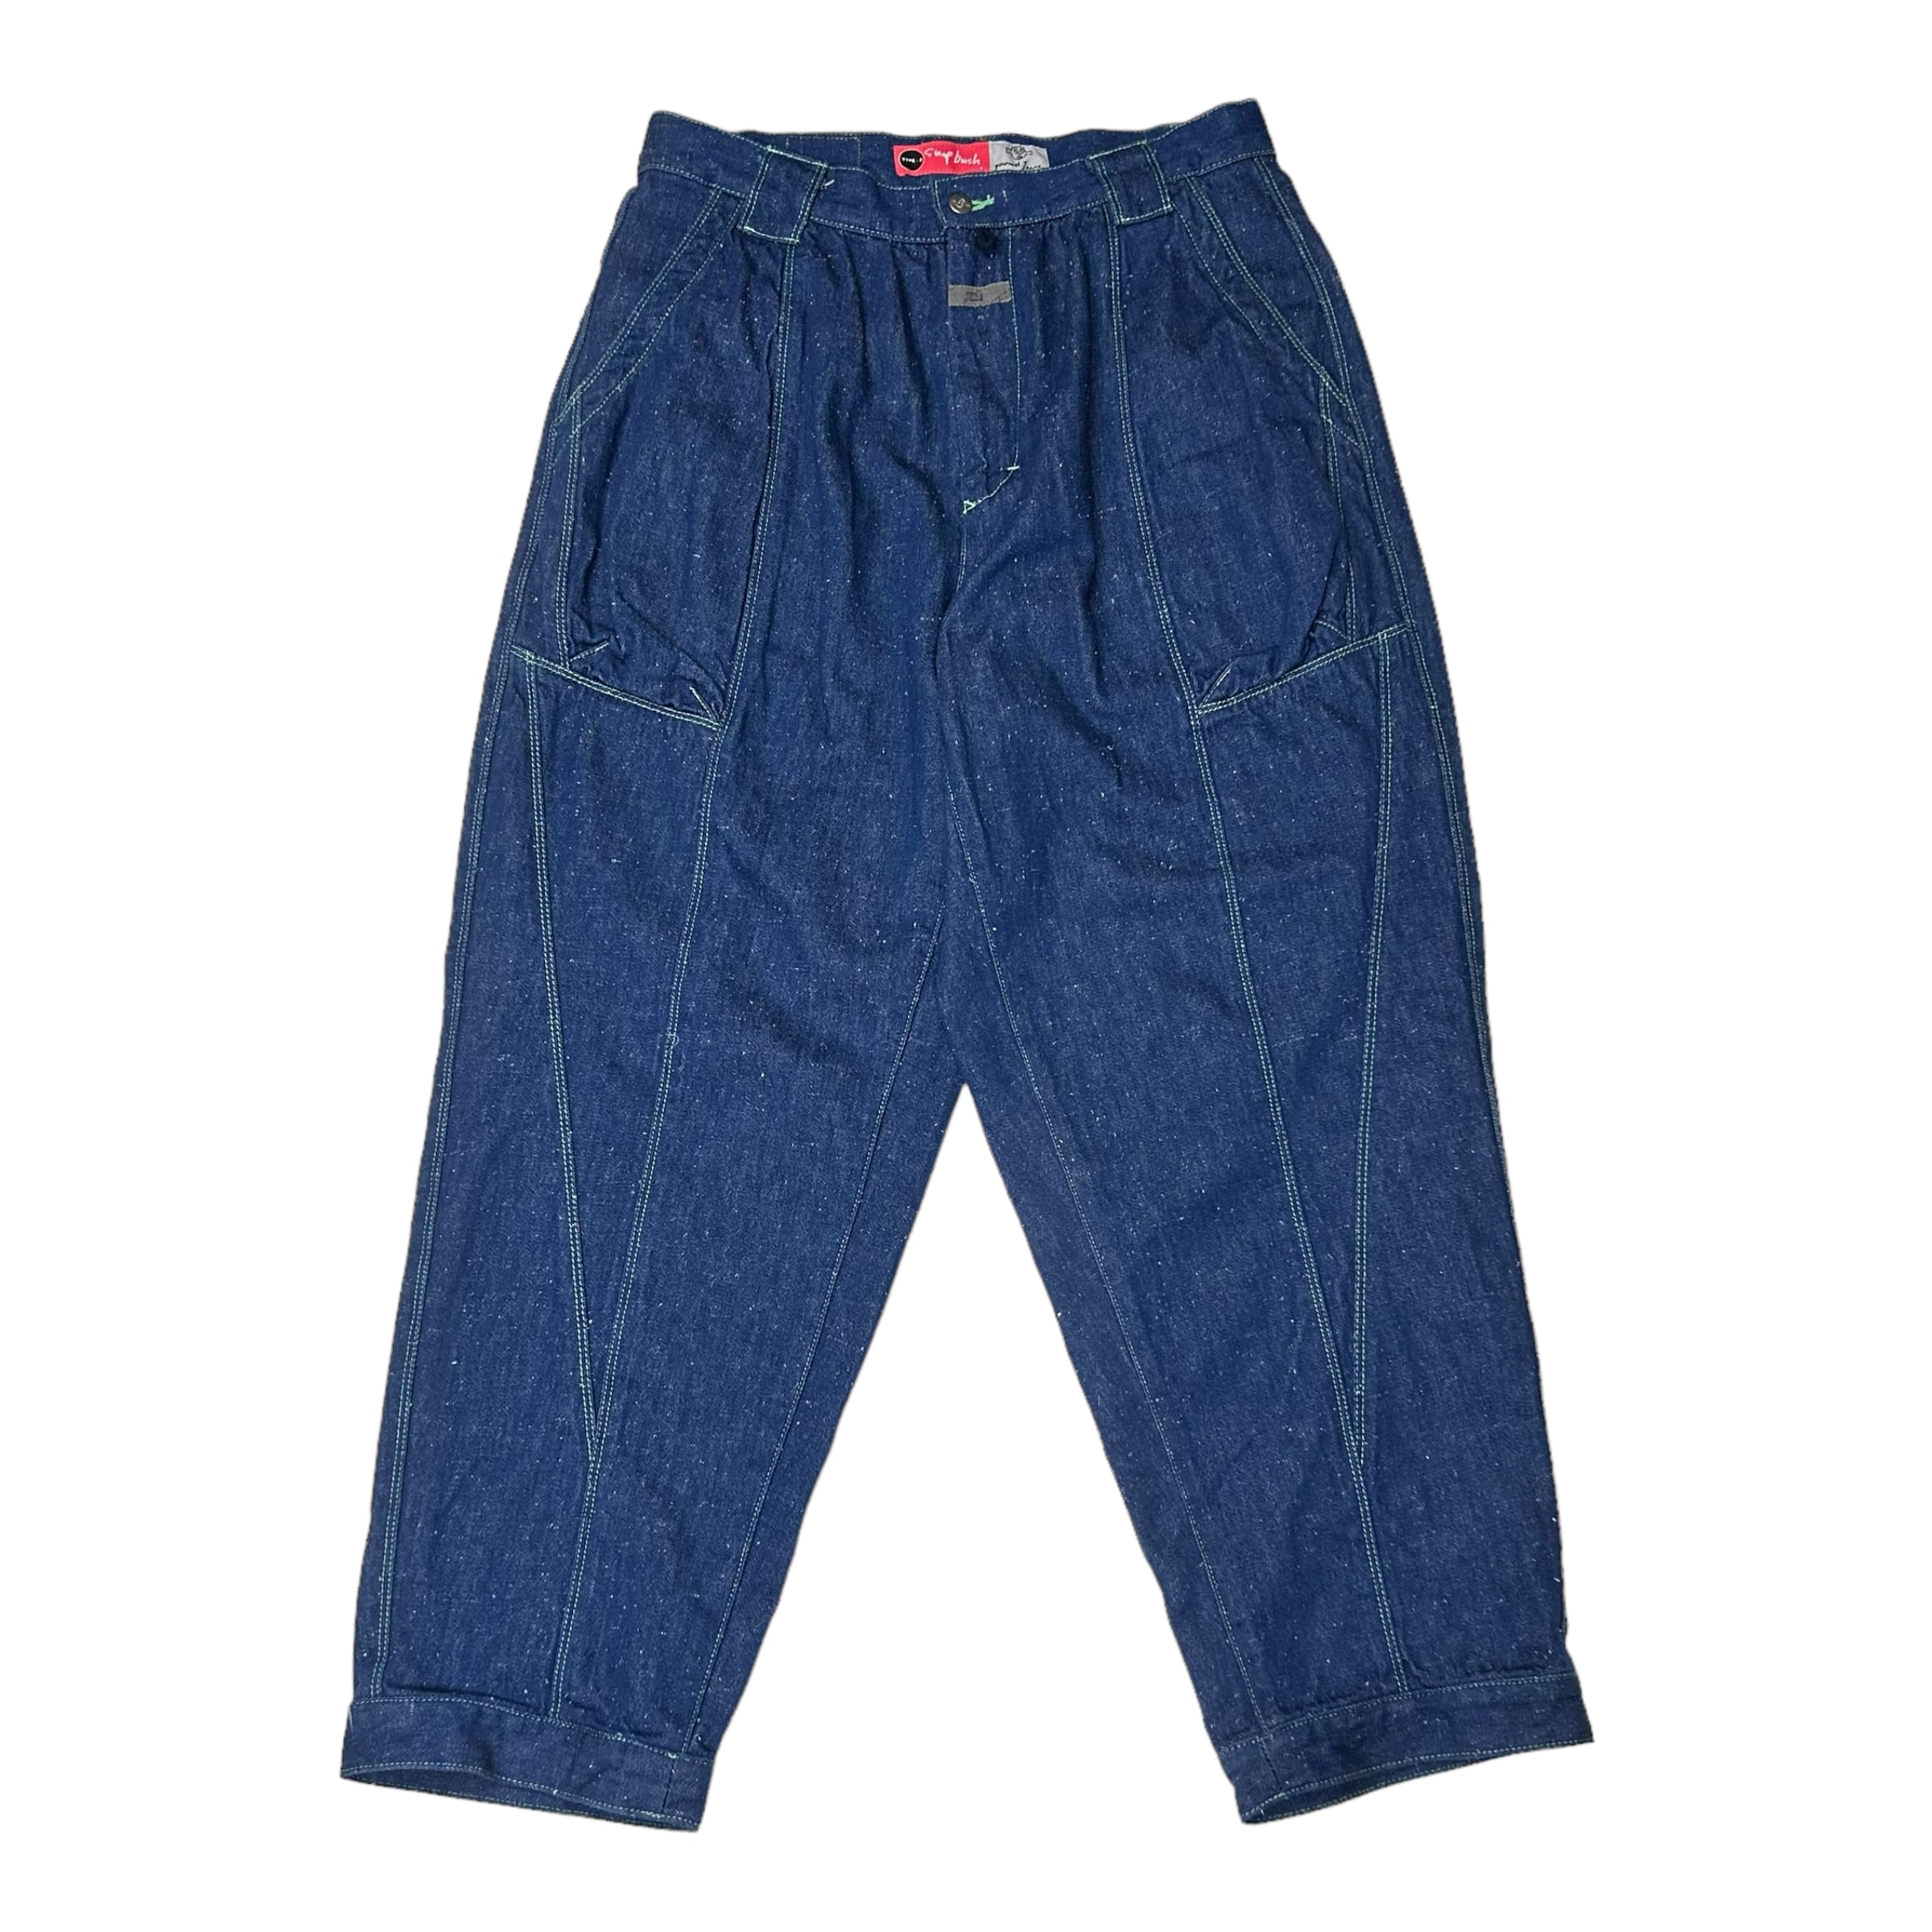 【gourmet jeans】NO SNAP BUSH(DENIM)〈送料無料〉 | STORY powered by BASE